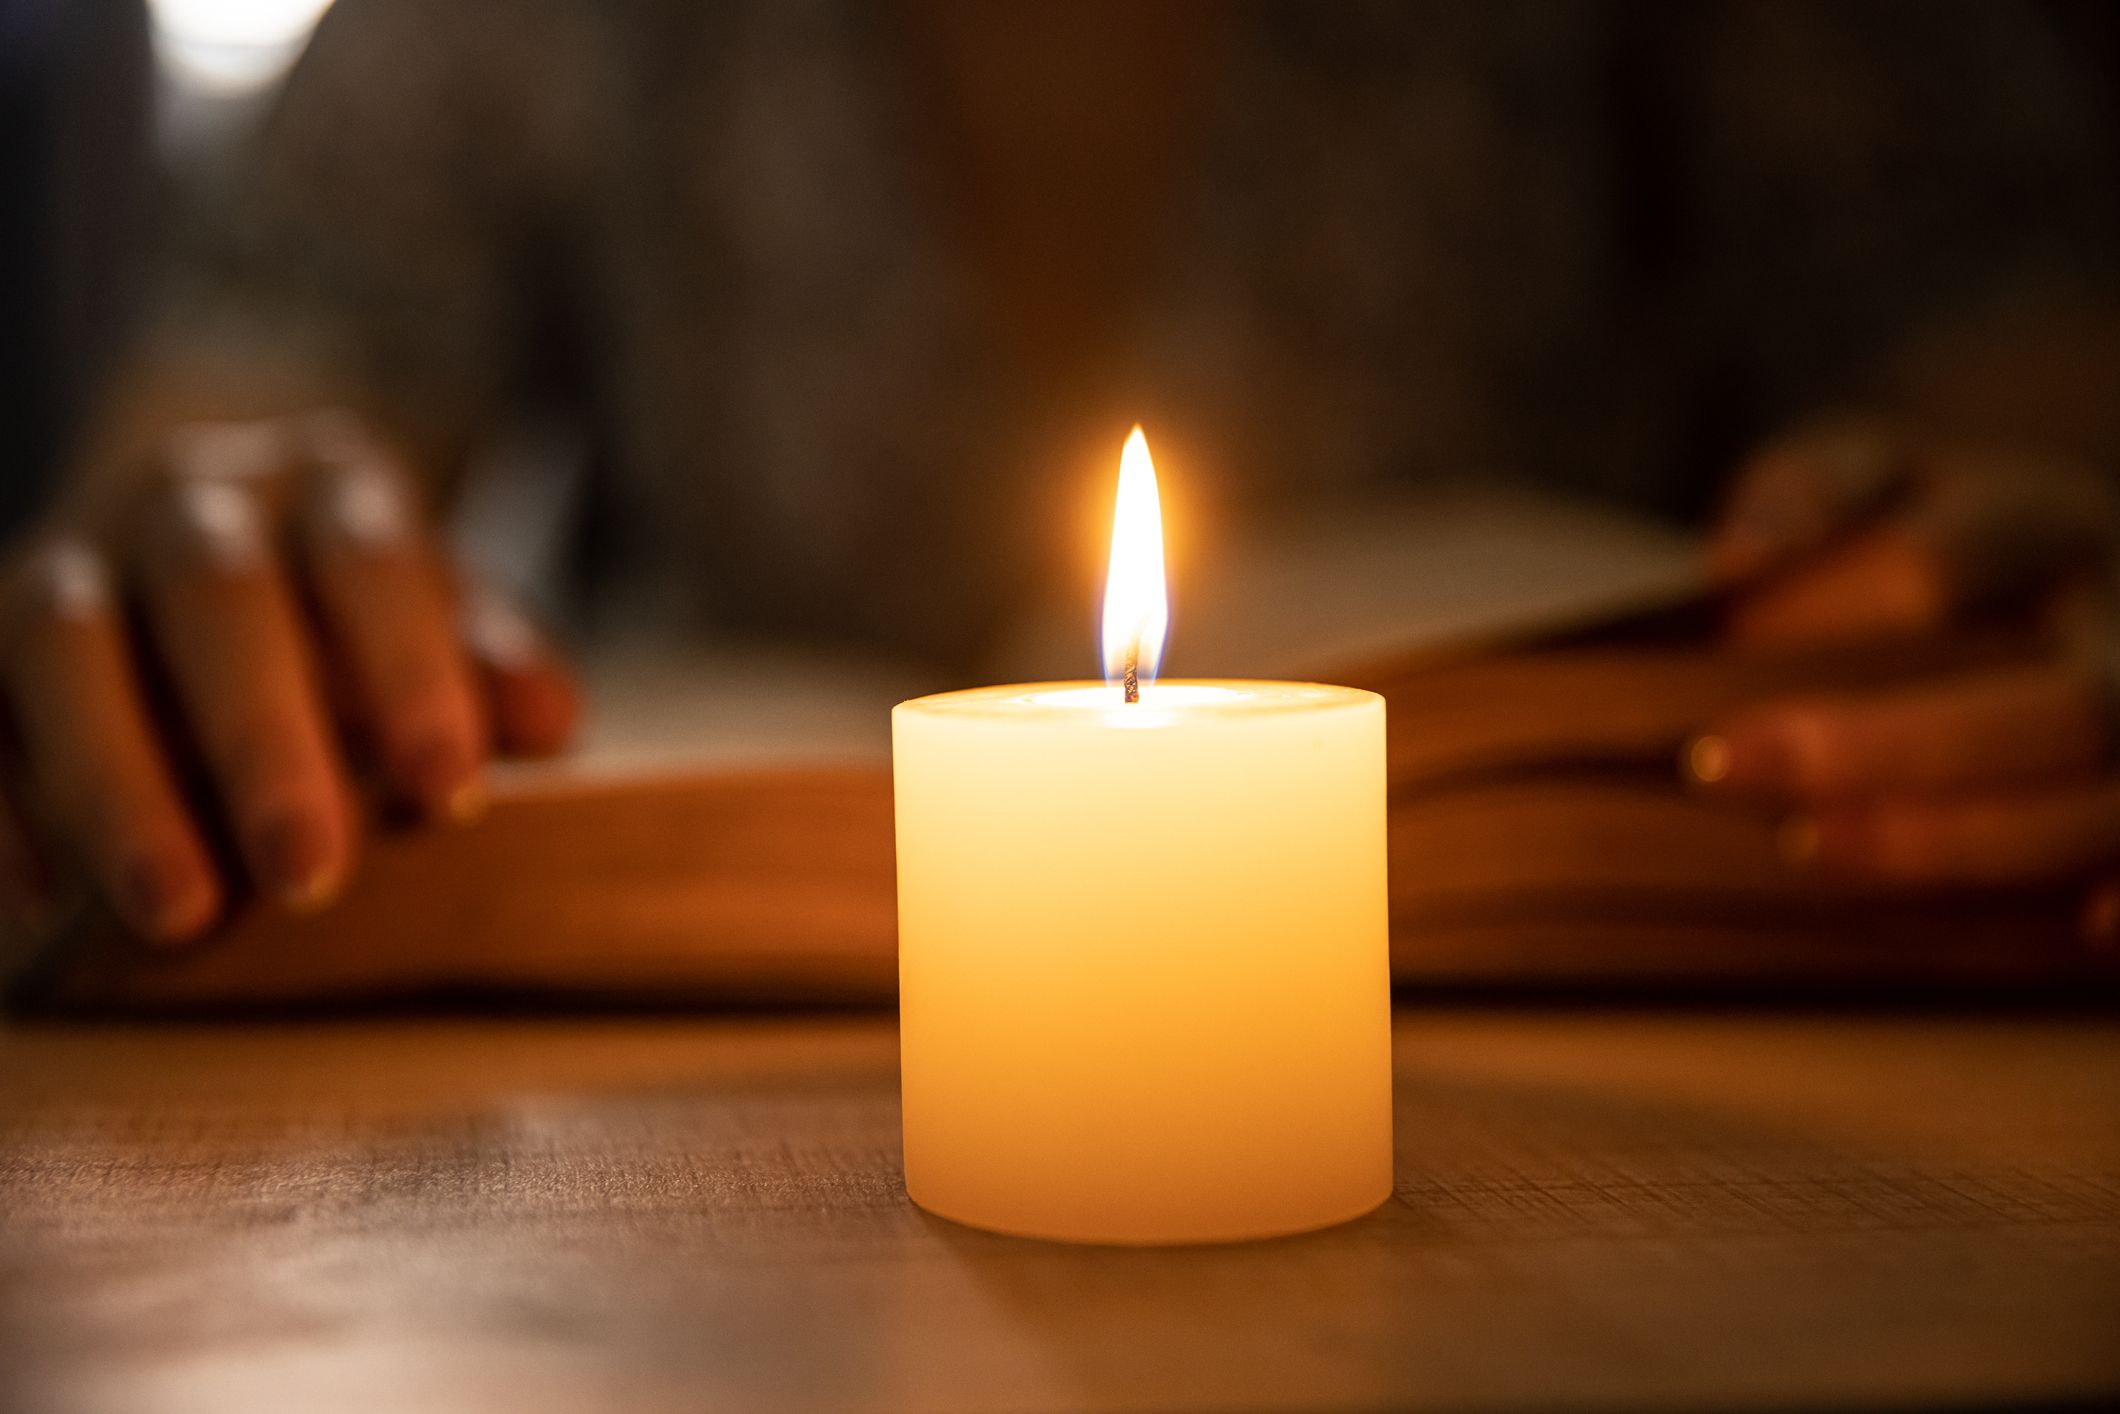 <p>You’ll have to leave the pleasantly aromatic candles at home before heading out for your next cruise vacation. Candles are 100% hazardous when it comes to posing a very heightened fire risk. Imagine if you were to bring a candle and forget about putting it out before you left your room.</p>